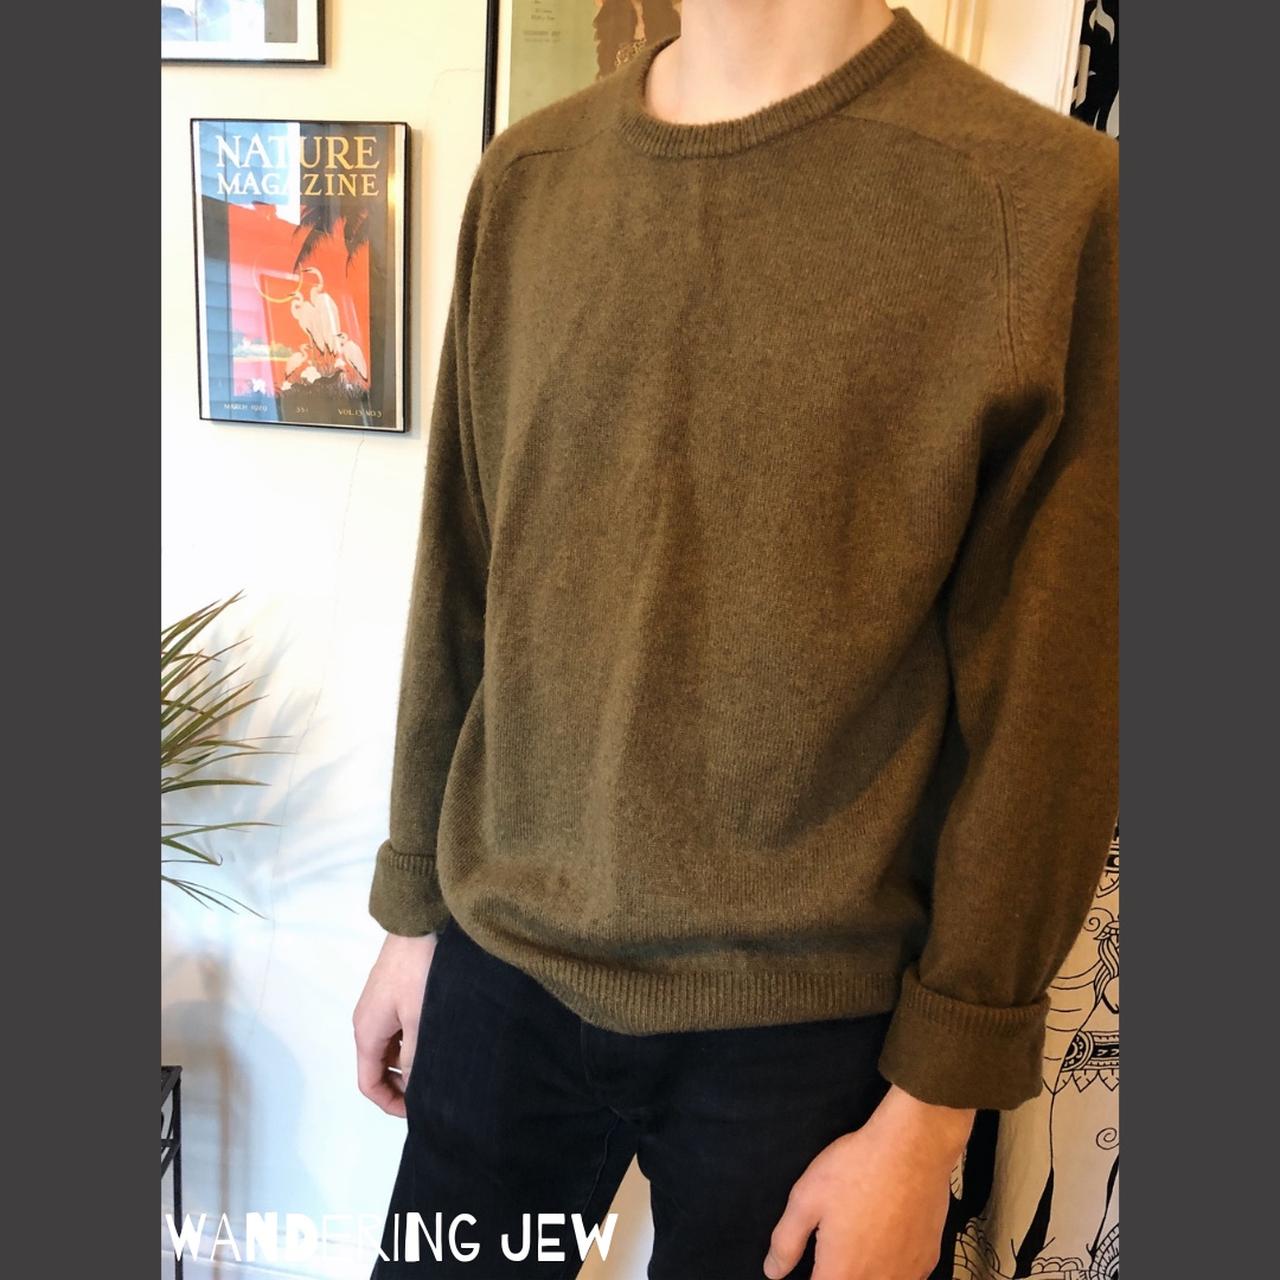 Incredibly soft Grant Thomas two ply cashmere... - Depop